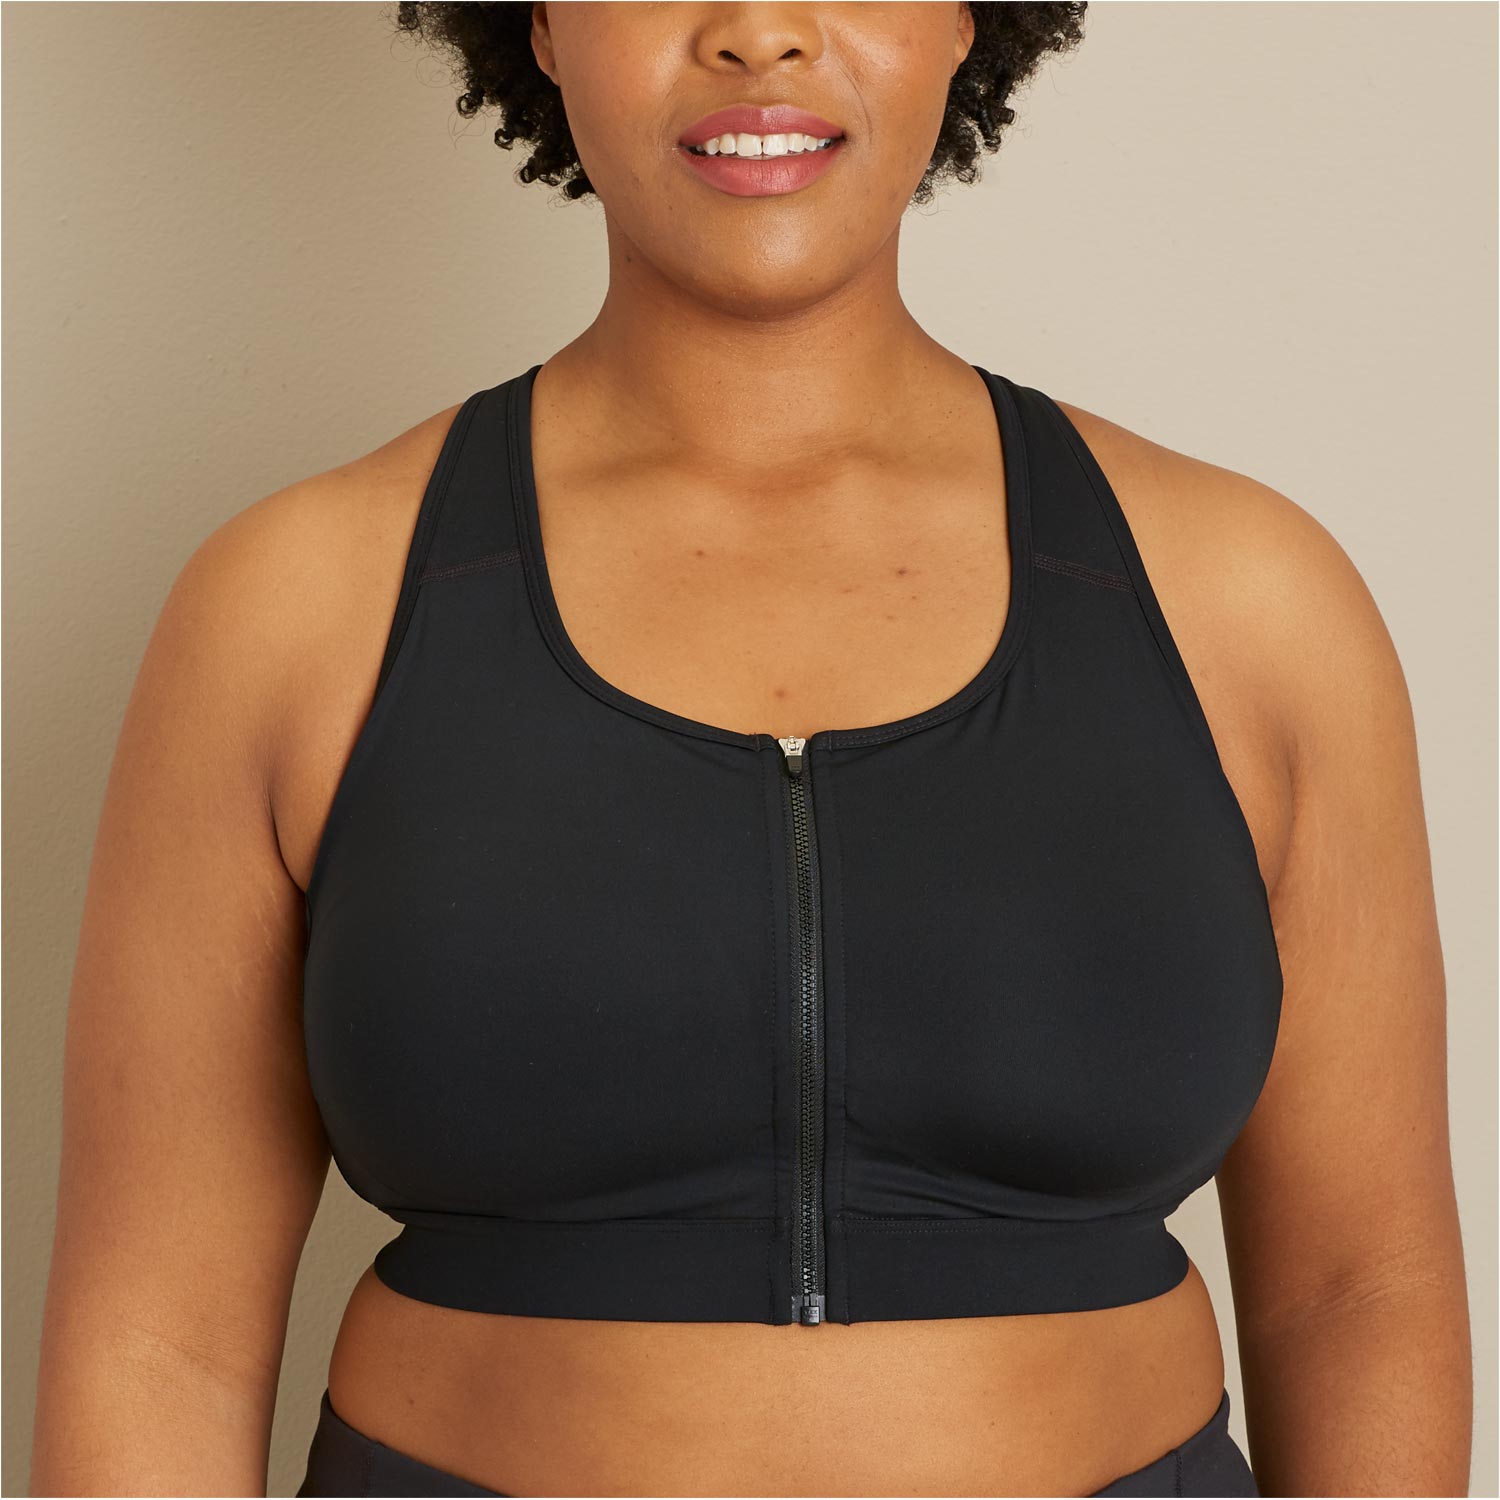 Duluth Trading Womens 2X Adjustable Black Sports Bra New with tags